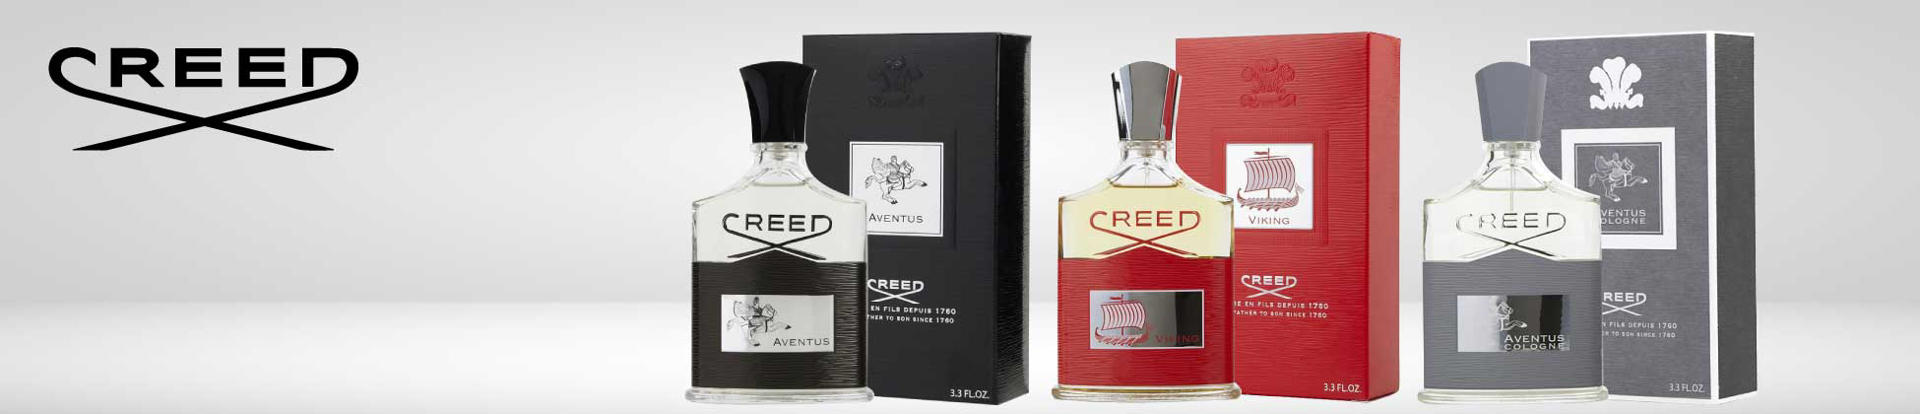 Picture for brand creed